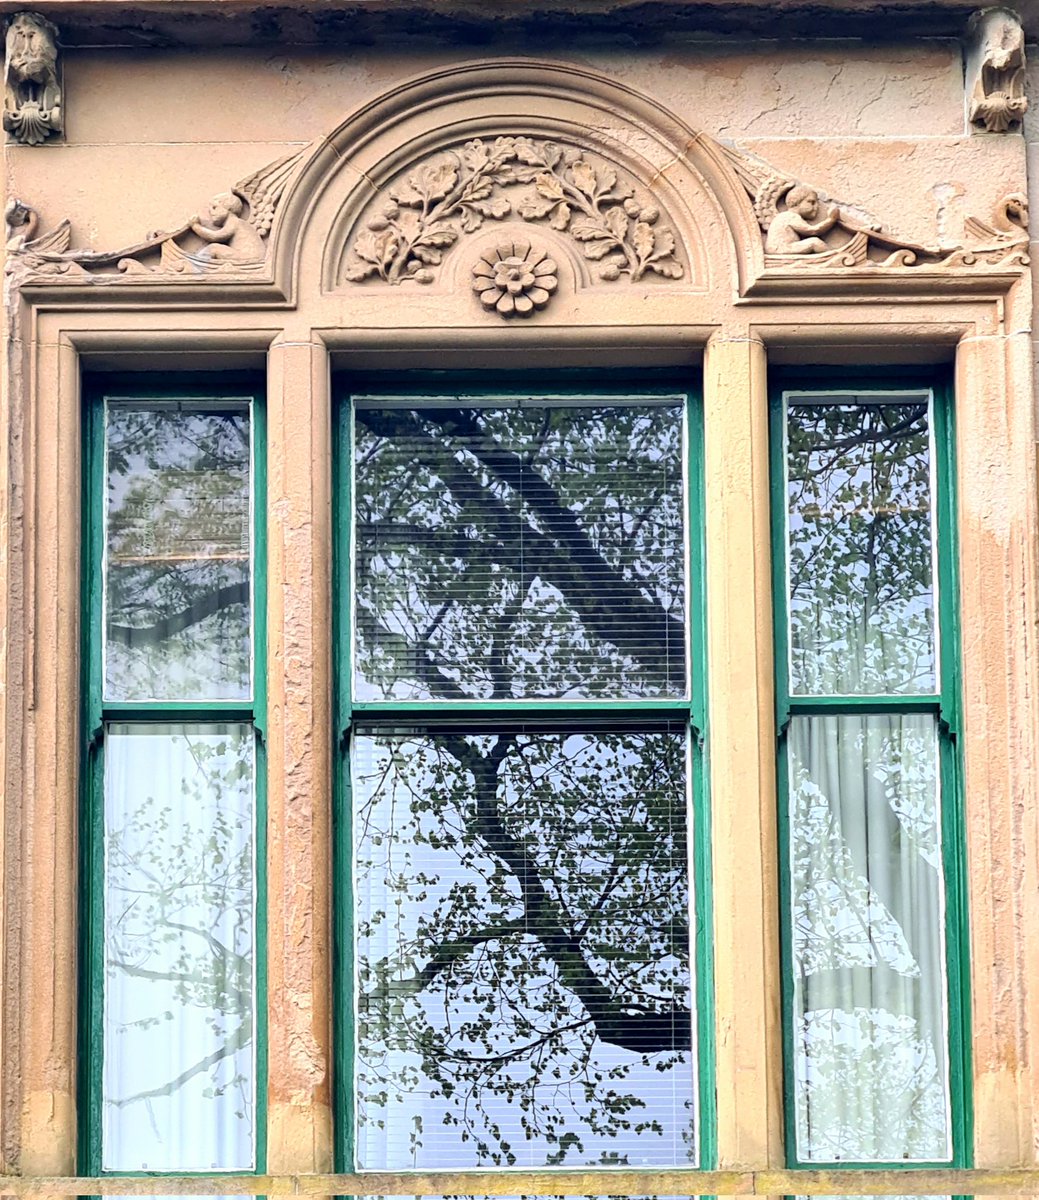 I love the details above these windows on a tenement on Peel Street in the Partick area of Glasgow, especially the cherubs in boats getting pulled along by swans. 

Cont./

#glasgow #architecture #glasgowbuildings #partick #sculpture #design #cherubs #window #windowswednesday